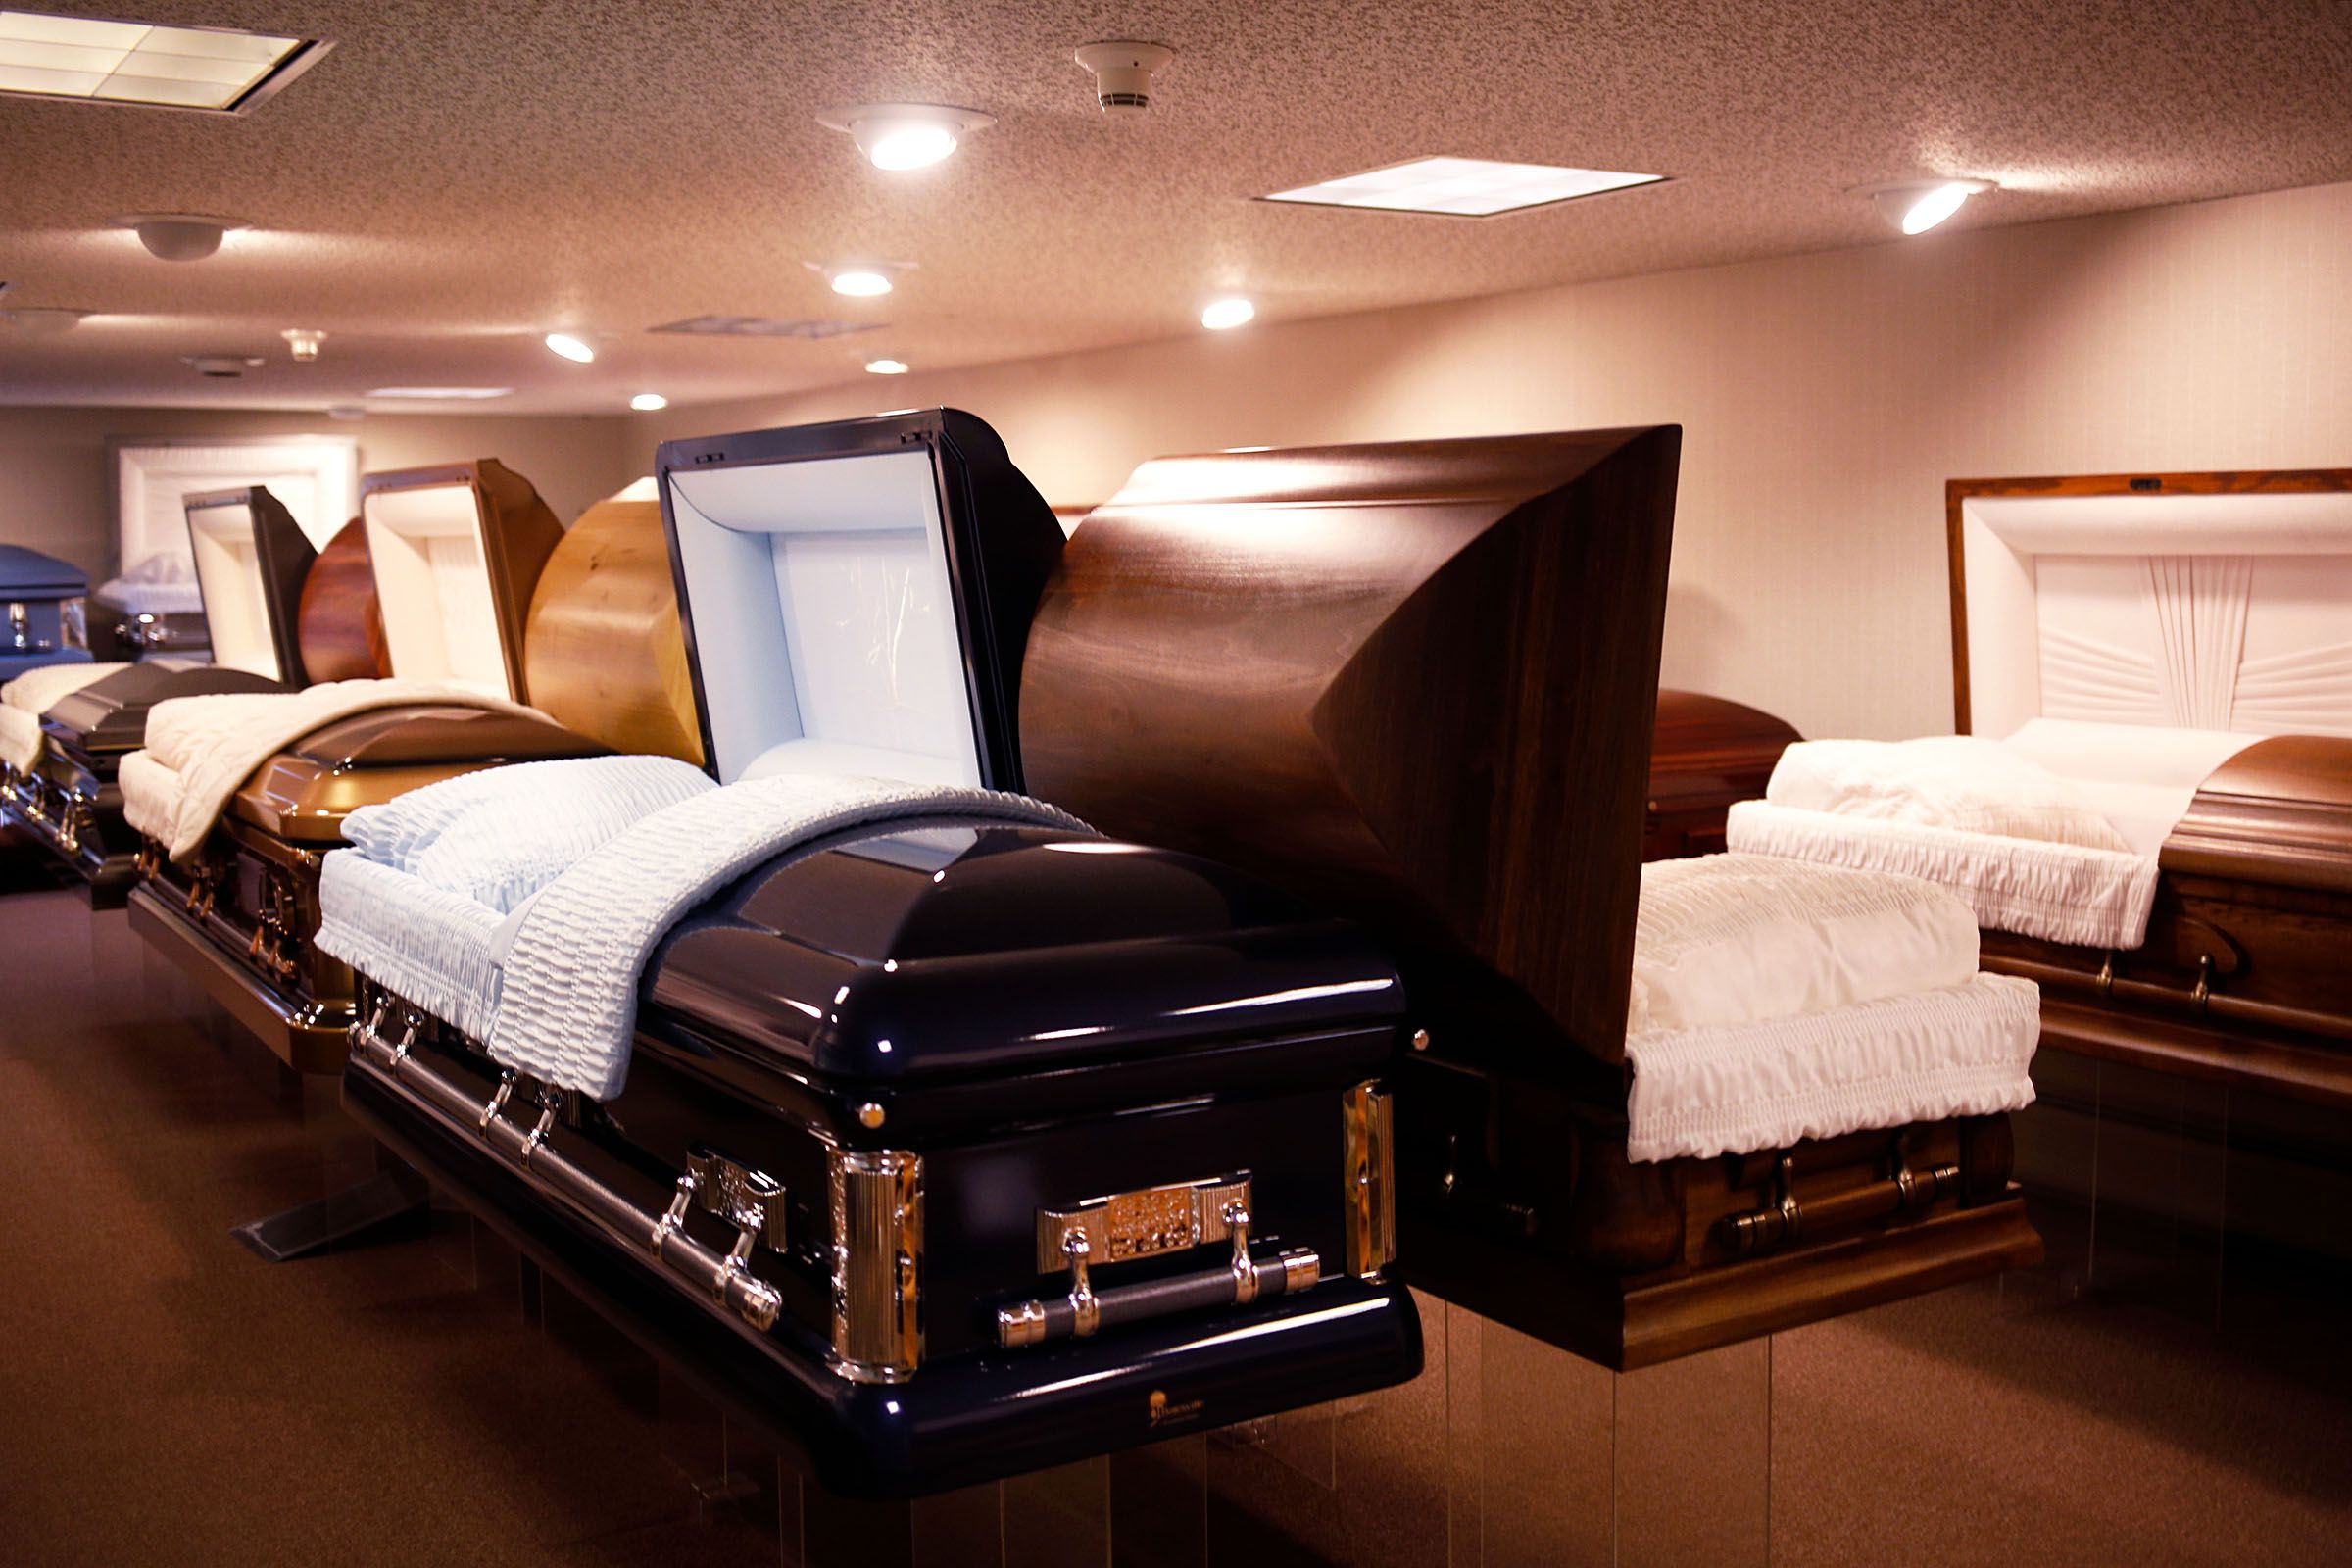 Stringer Funeral Home houses a showroom for casket options in Claremont, N.H., on Tuesday, April 9, 2019. Owner Mike Stringer says not many funeral homes have caskets on display anymore, due to the majority of people now choosing cremation. (Valley News - Joseph Ressler) Copyright Valley News. May not be reprinted or used online without permission. Send requests to permission@vnews.com.